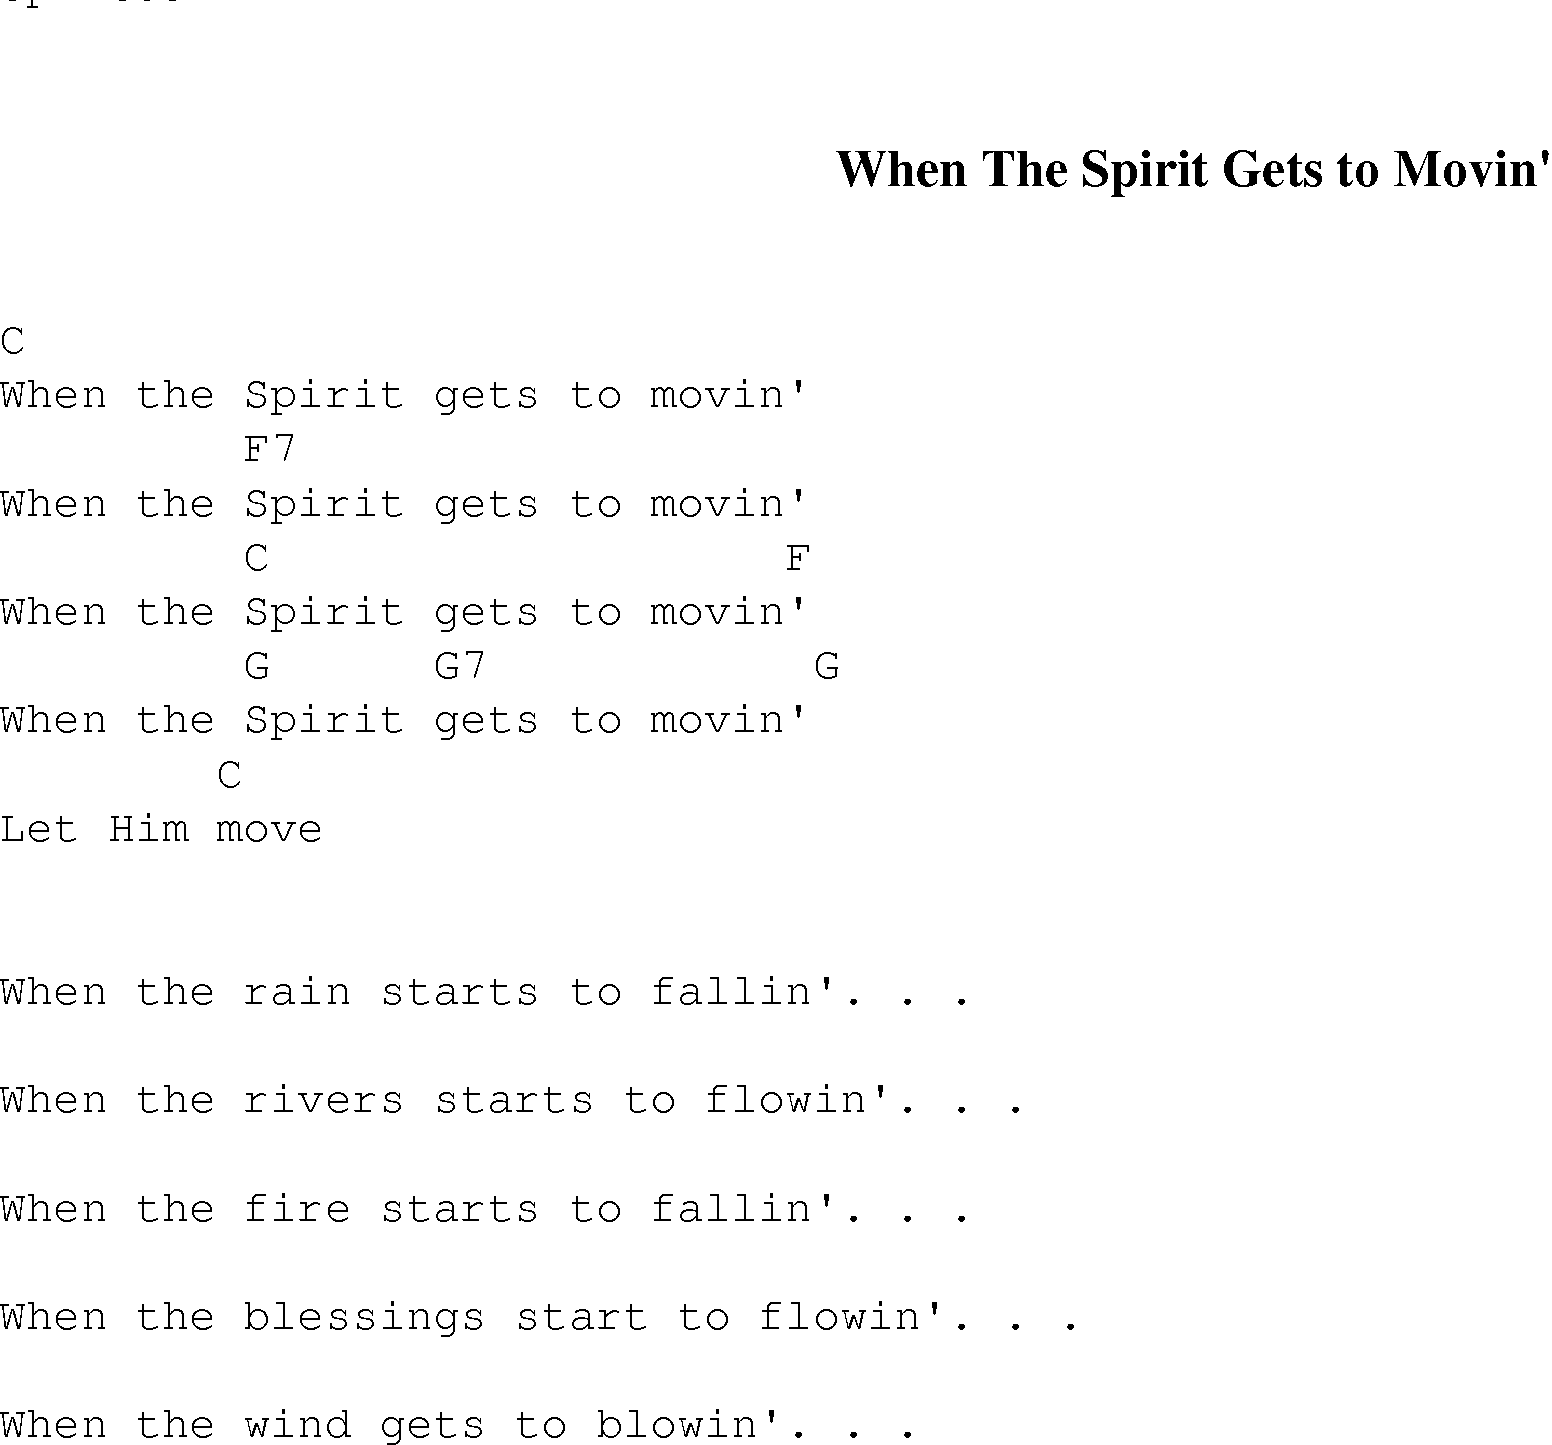 Gospel Song: when_the_spirit_gets_to_movin, lyrics and chords.